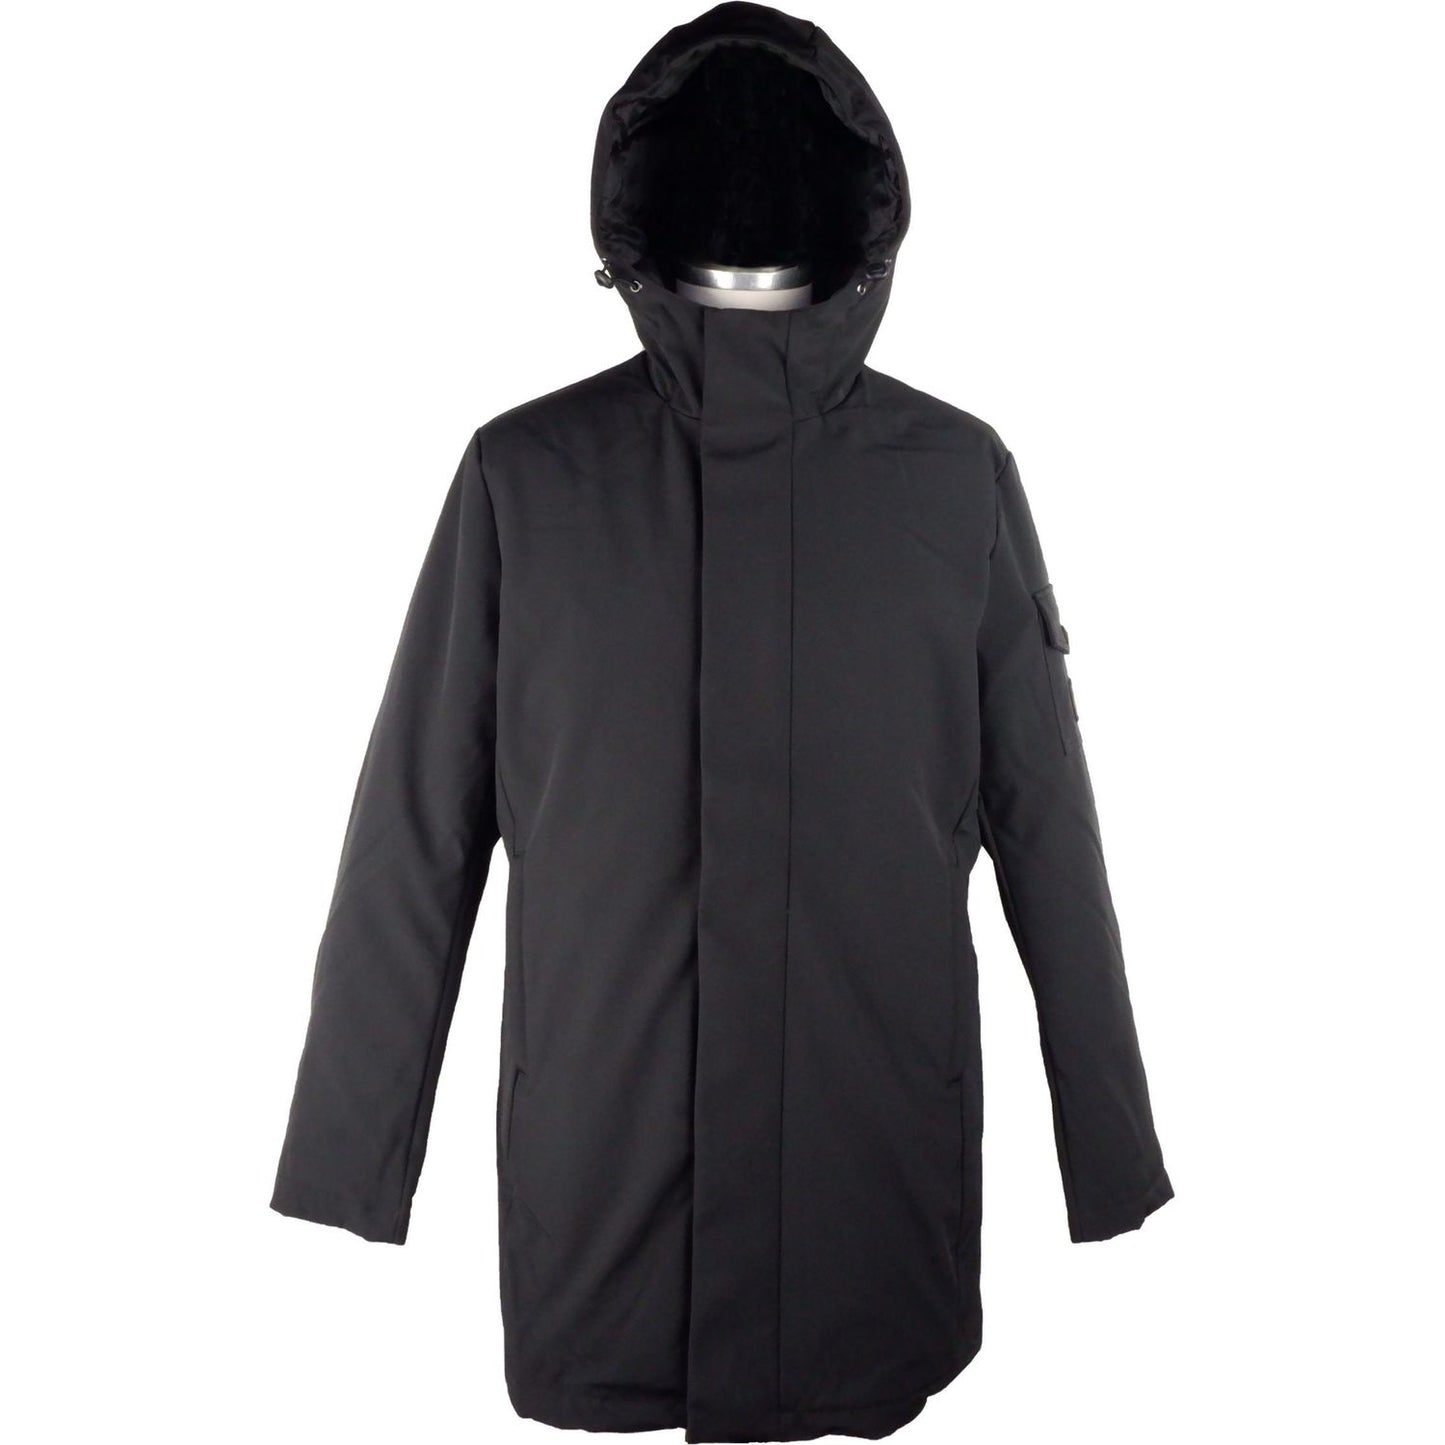 Refrigiwear Sleek Hooded Long Jacket with Zip and Button Closure black-polyester-jacket-8 stock_product_image_5263_1149612408-38-scaled-00beea7b-c89.jpg